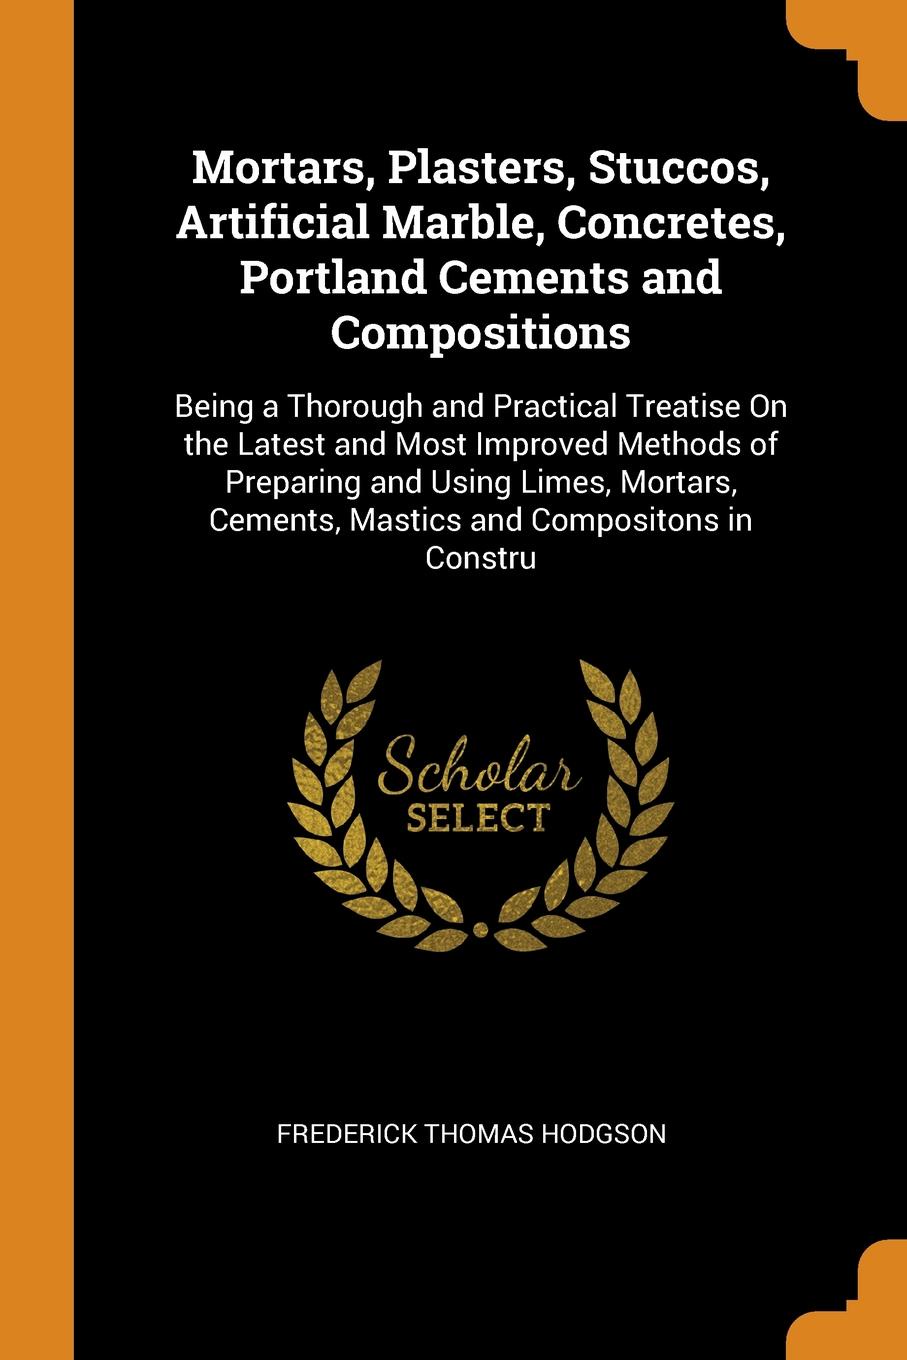 Mortars, Plasters, Stuccos, Artificial Marble, Concretes, Portland Cements and Compositions. Being a Thorough and Practical Treatise On the Latest and Most Improved Methods of Preparing and Using Limes, Mortars, Cements, Mastics and Compositons in...